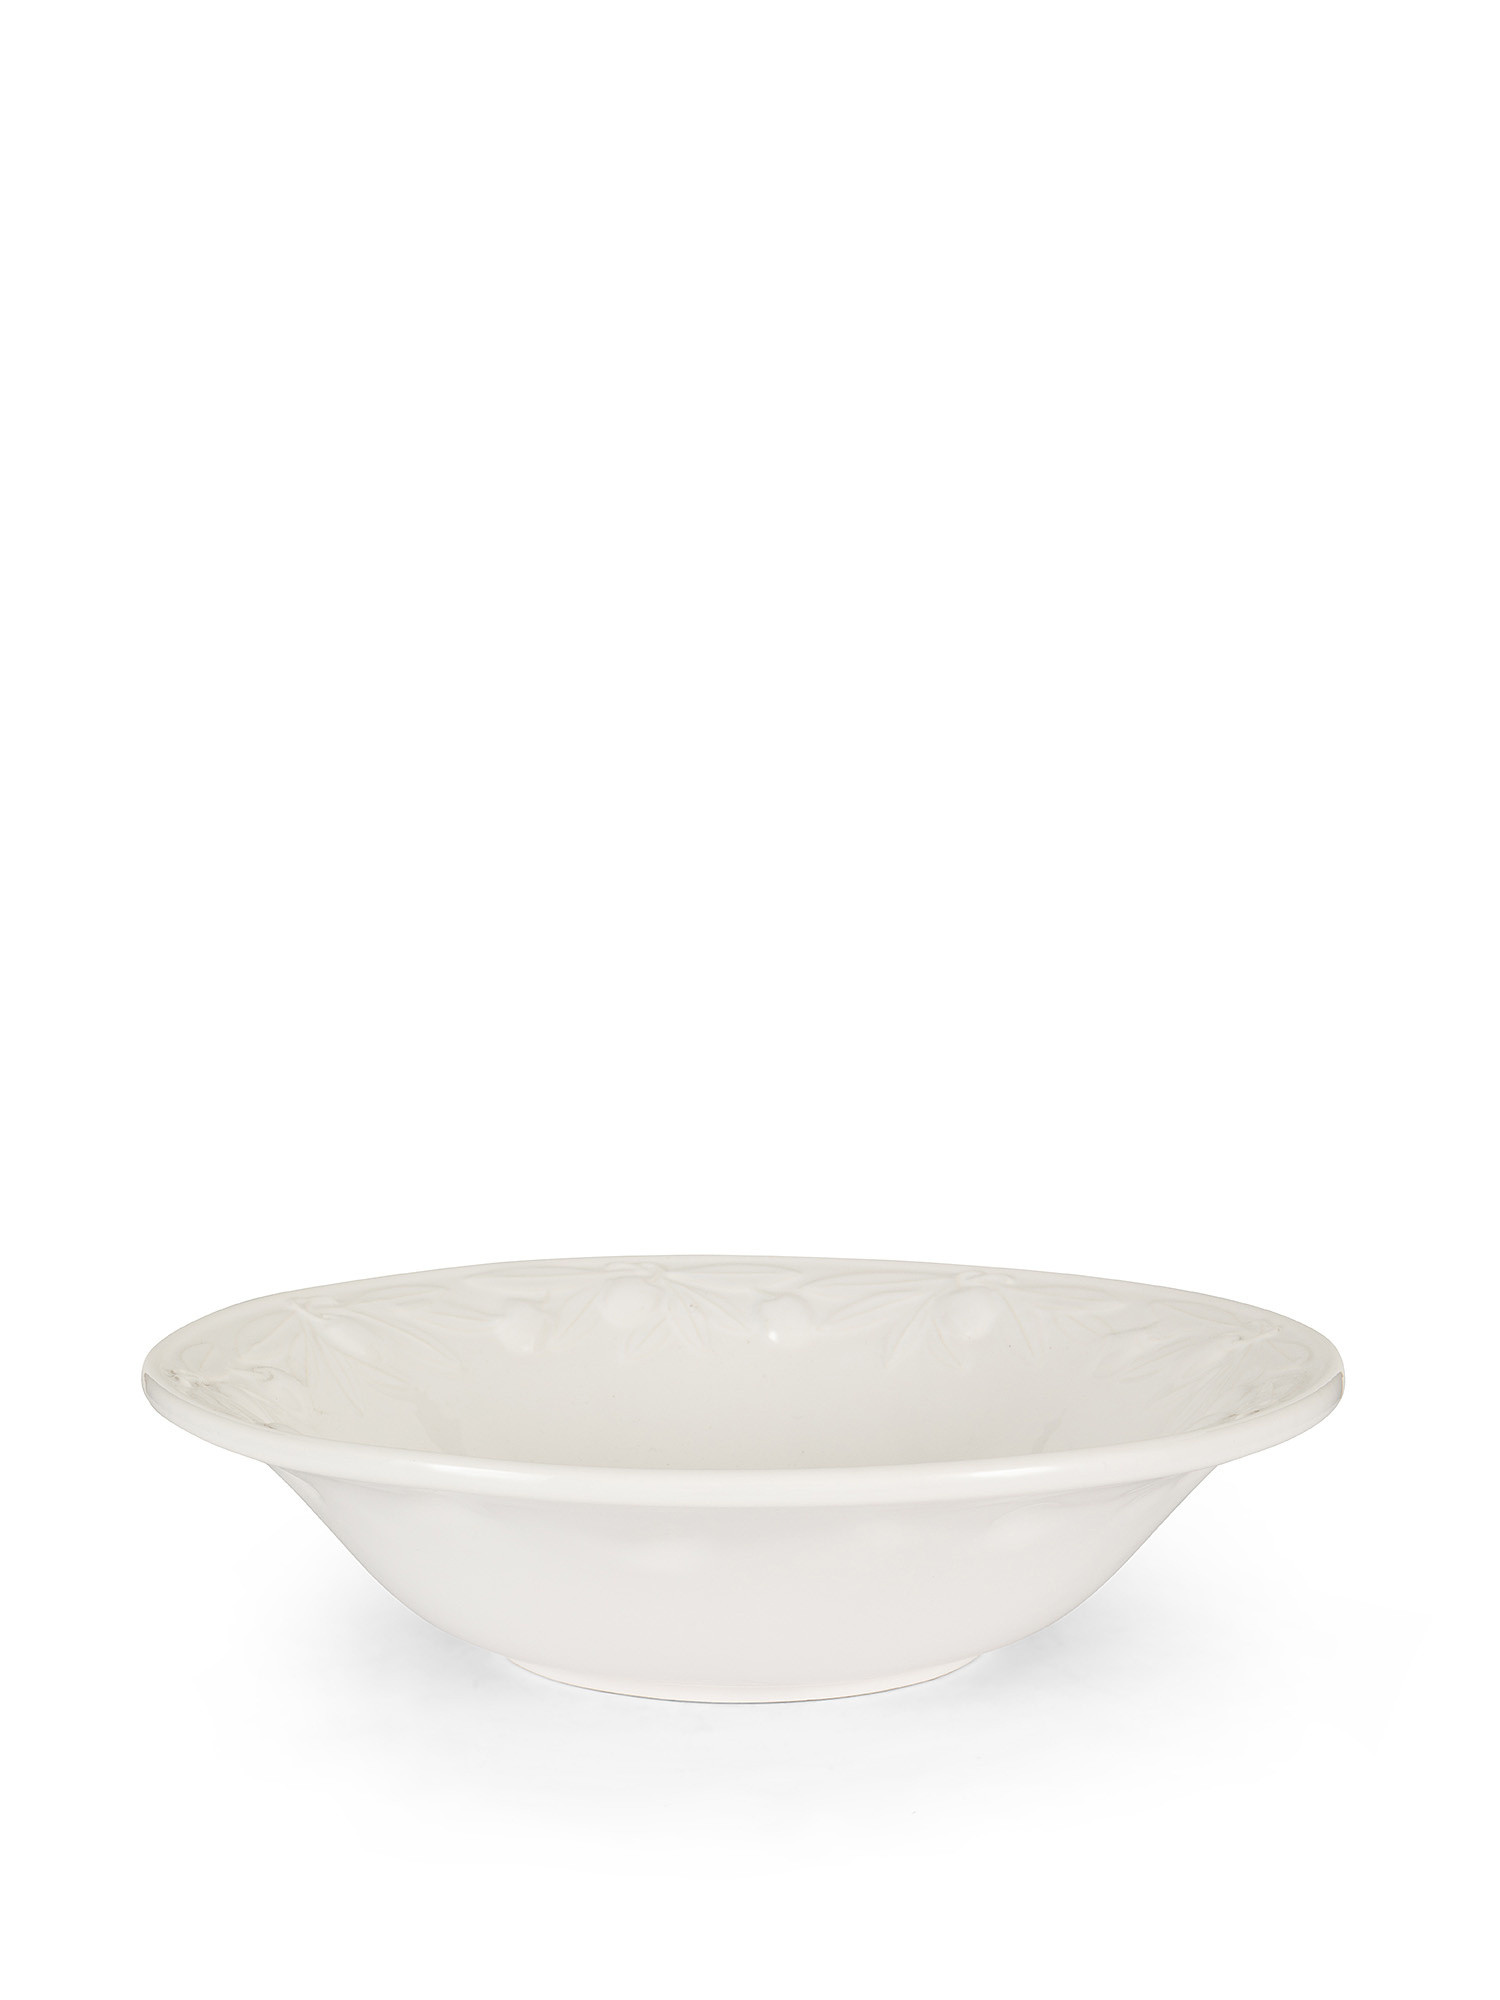 Ceramic bowl with olive detail, White, large image number 0